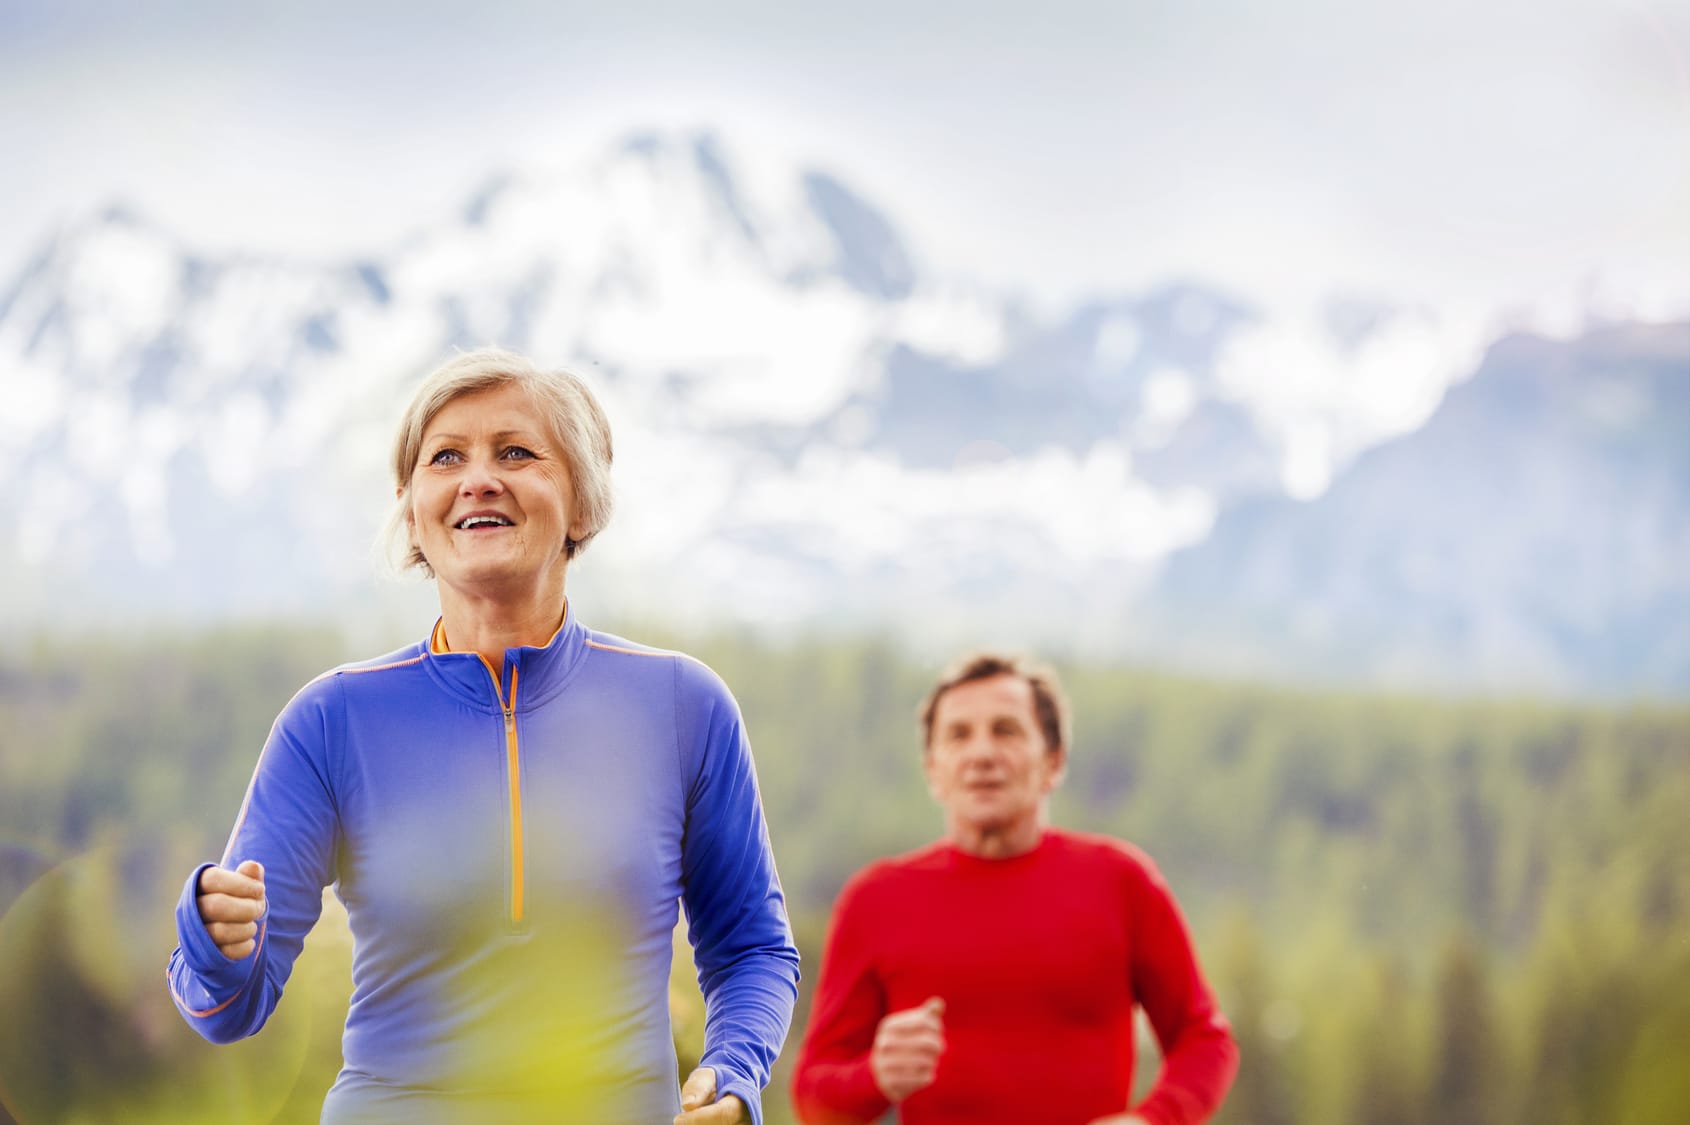 Elderly couple running outside with mountains in the background.